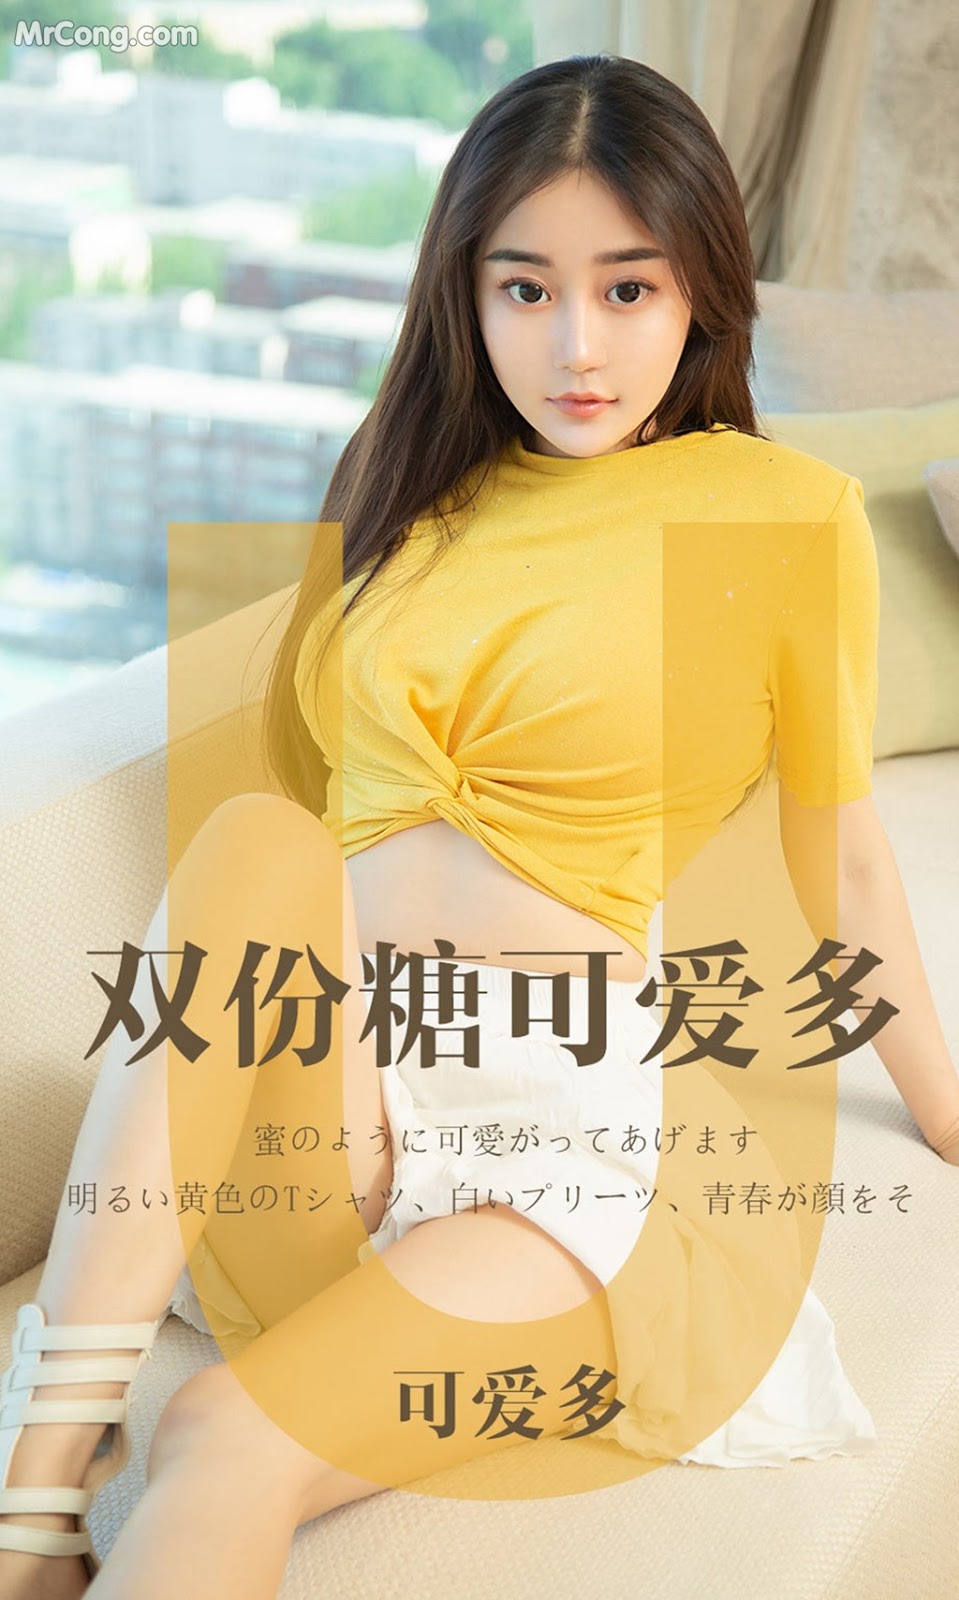 UGIRLS - Ai You Wu App No.1455: 可爱 多 (35 pictures)